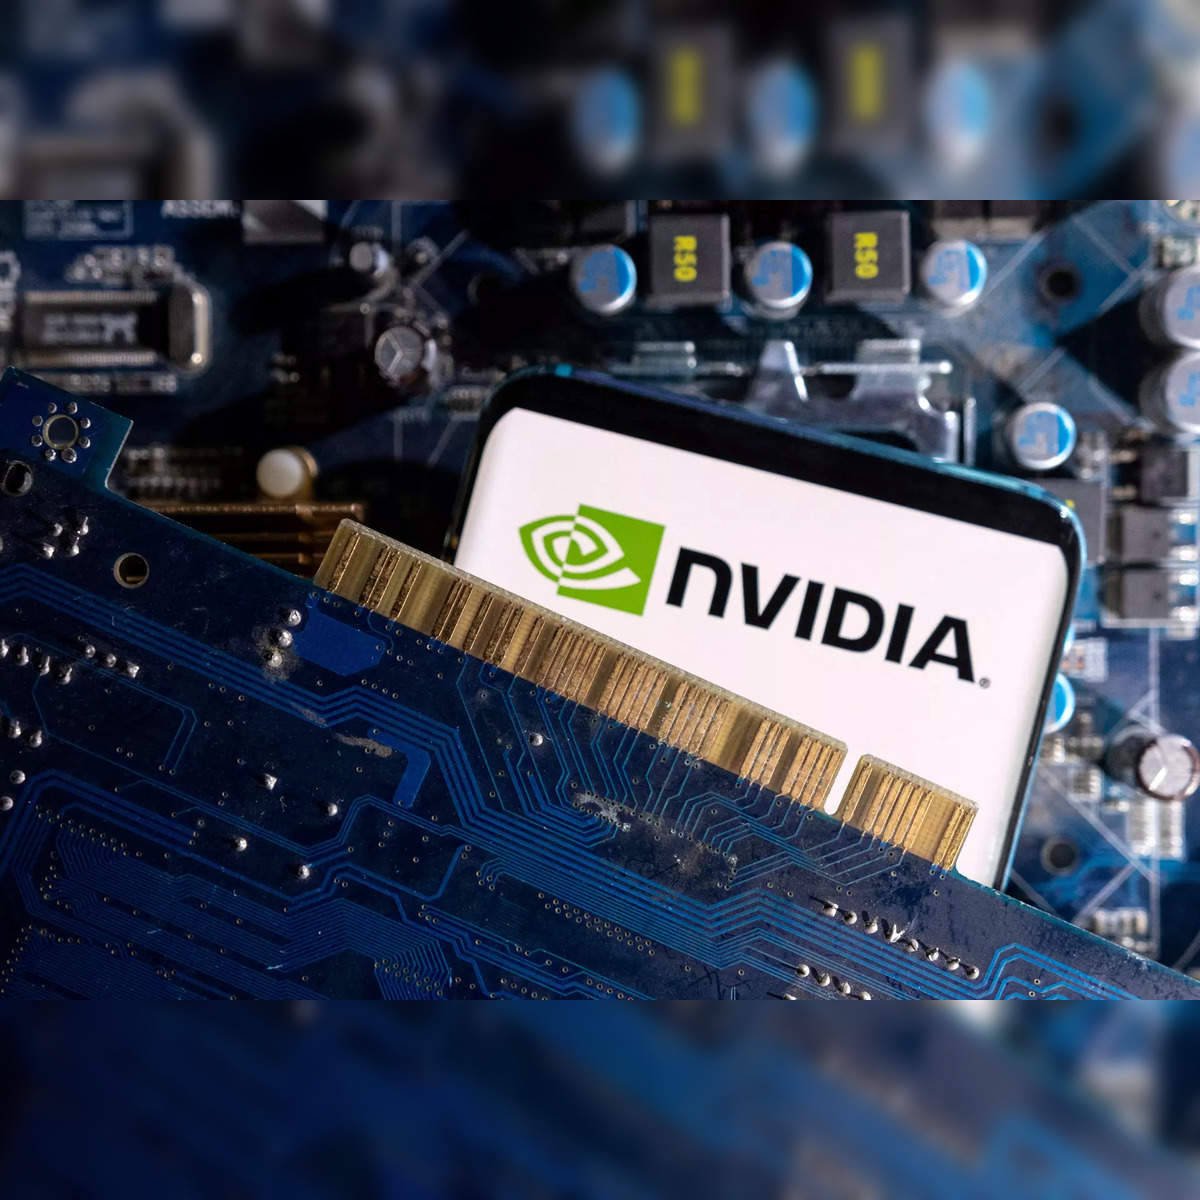 Nvidia is flying high thanks to AI